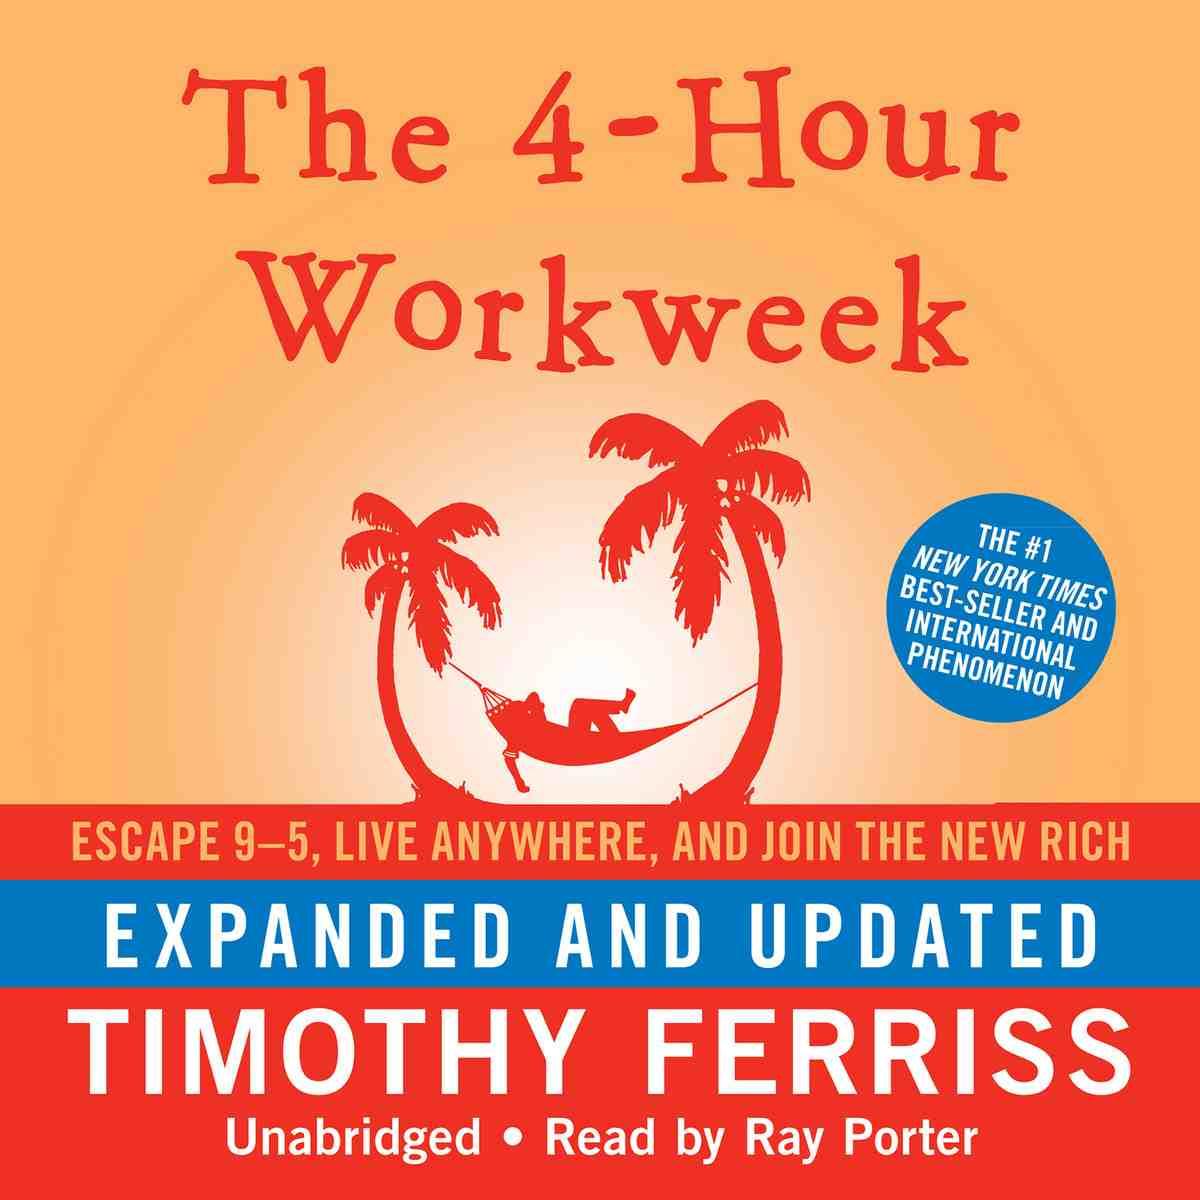 The 4 hour work week by Timothy Ferriss